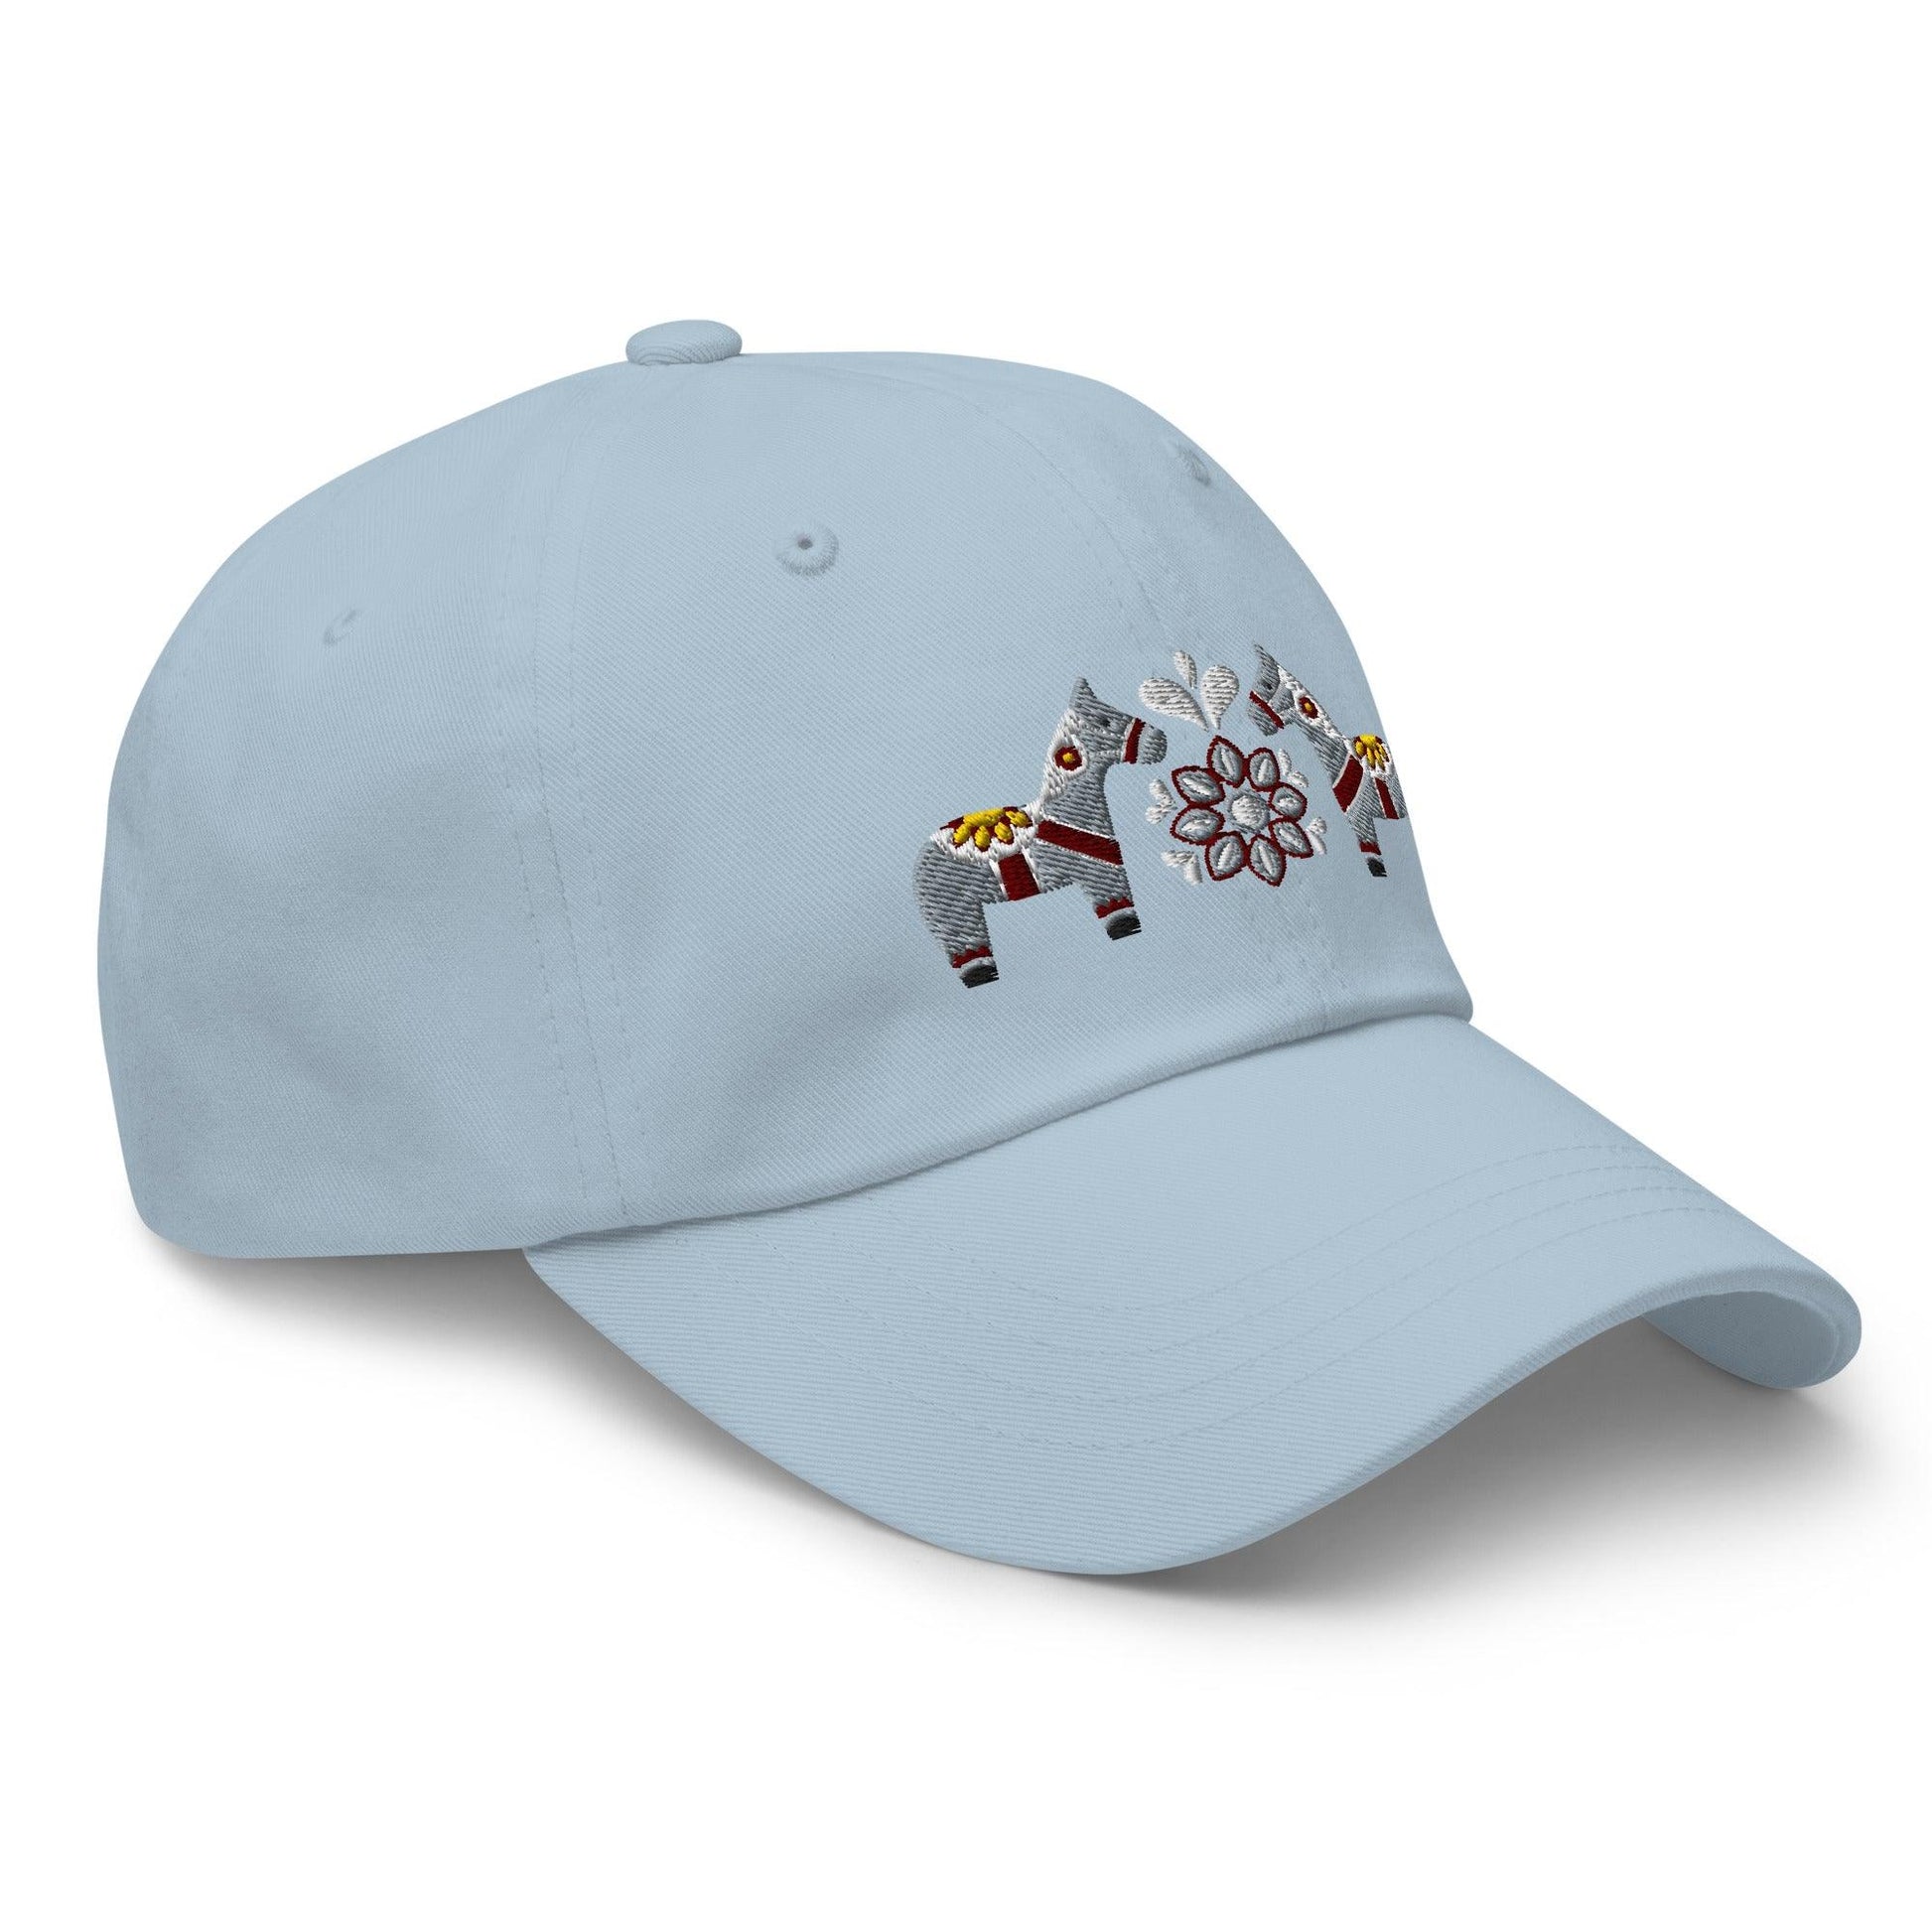 Swedish Dala Horse Embroidered Dad Hat - Gray - The Global Wanderer